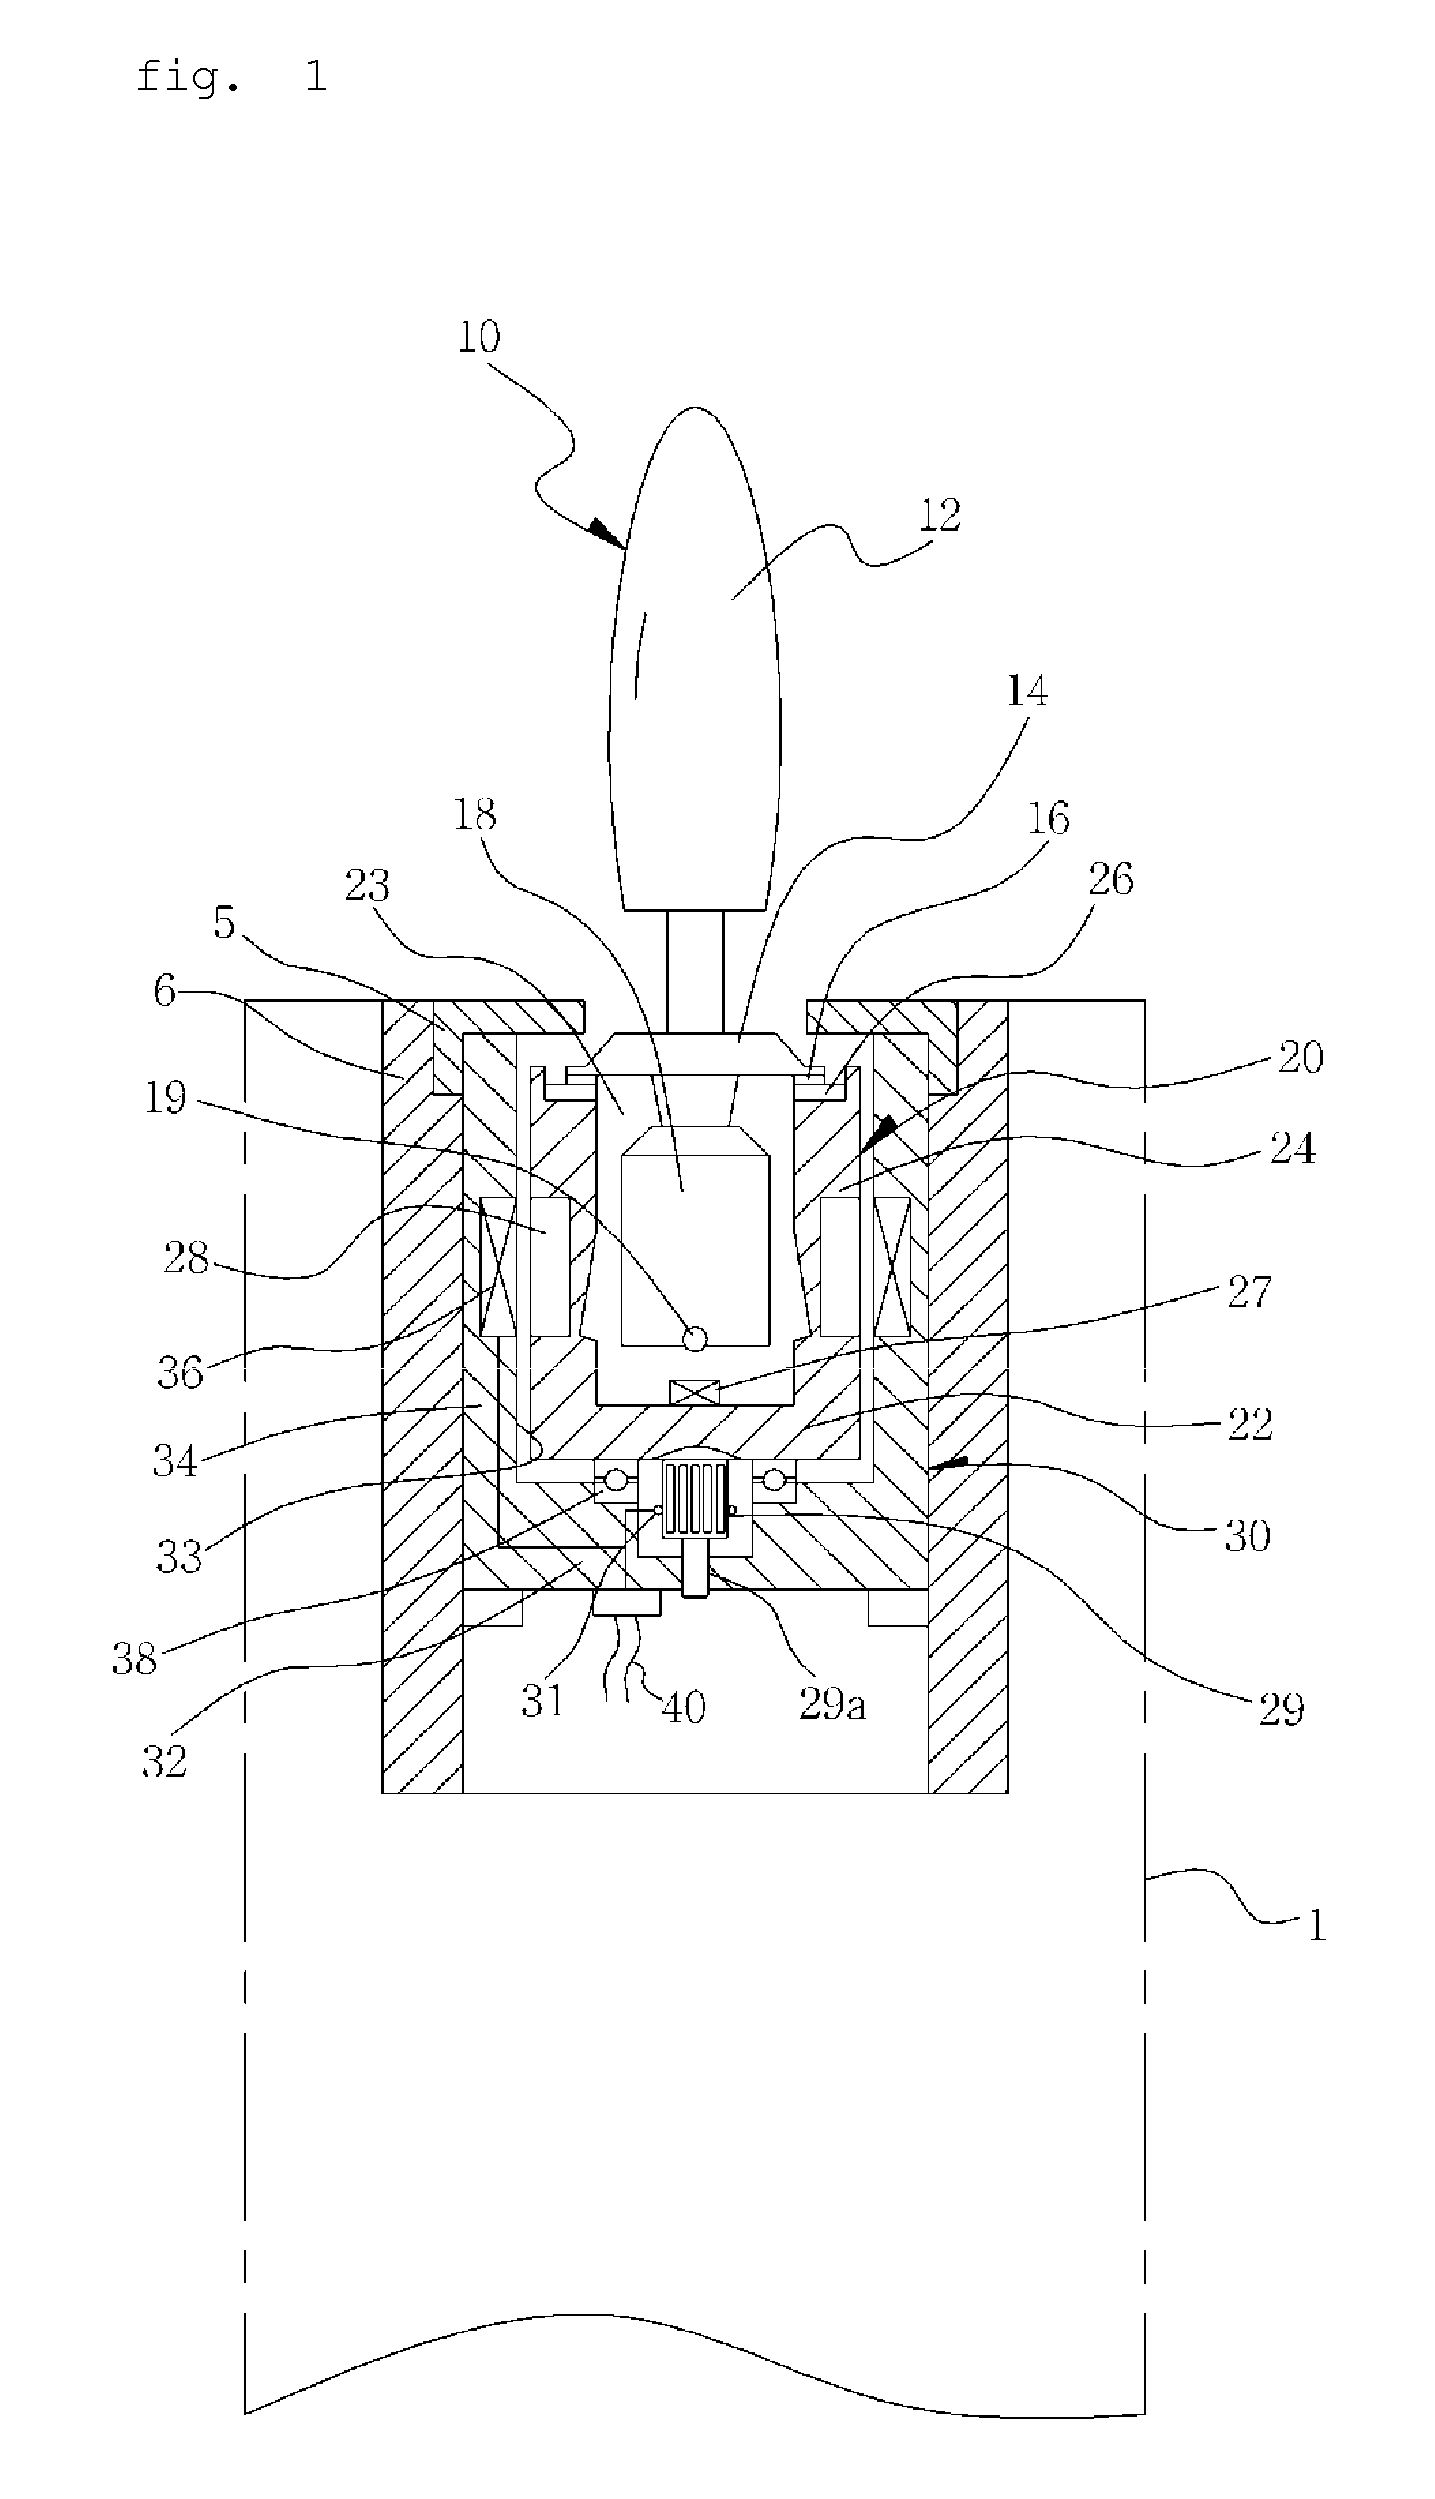 Portable electric candle having a lamp pendulating and rotating simulataneously